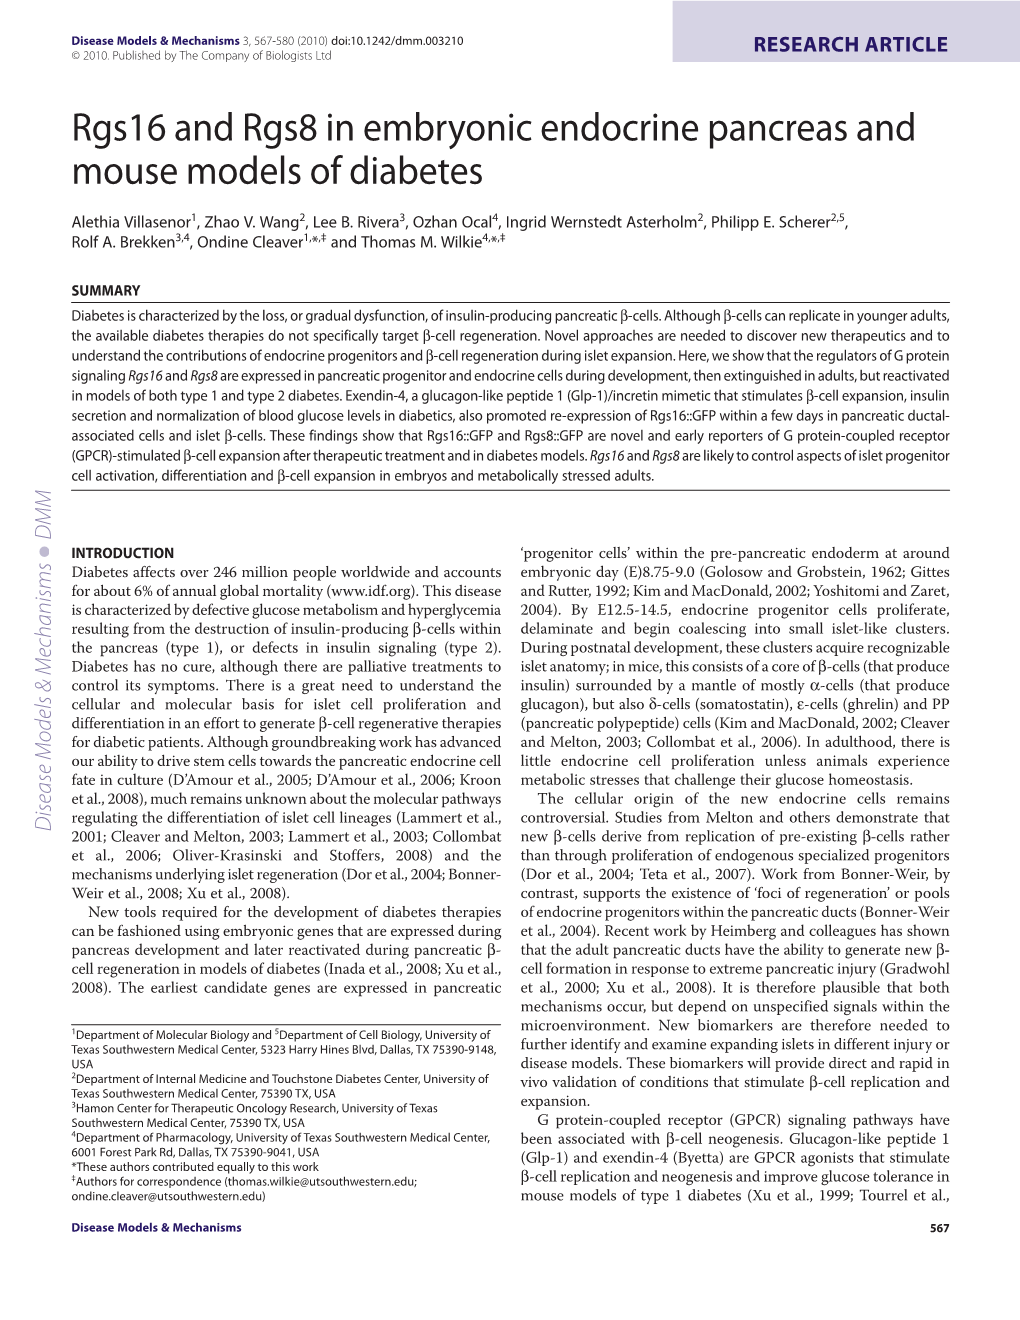 Rgs16 and Rgs8 in Embryonic Endocrine Pancreas and Mouse Models of Diabetes